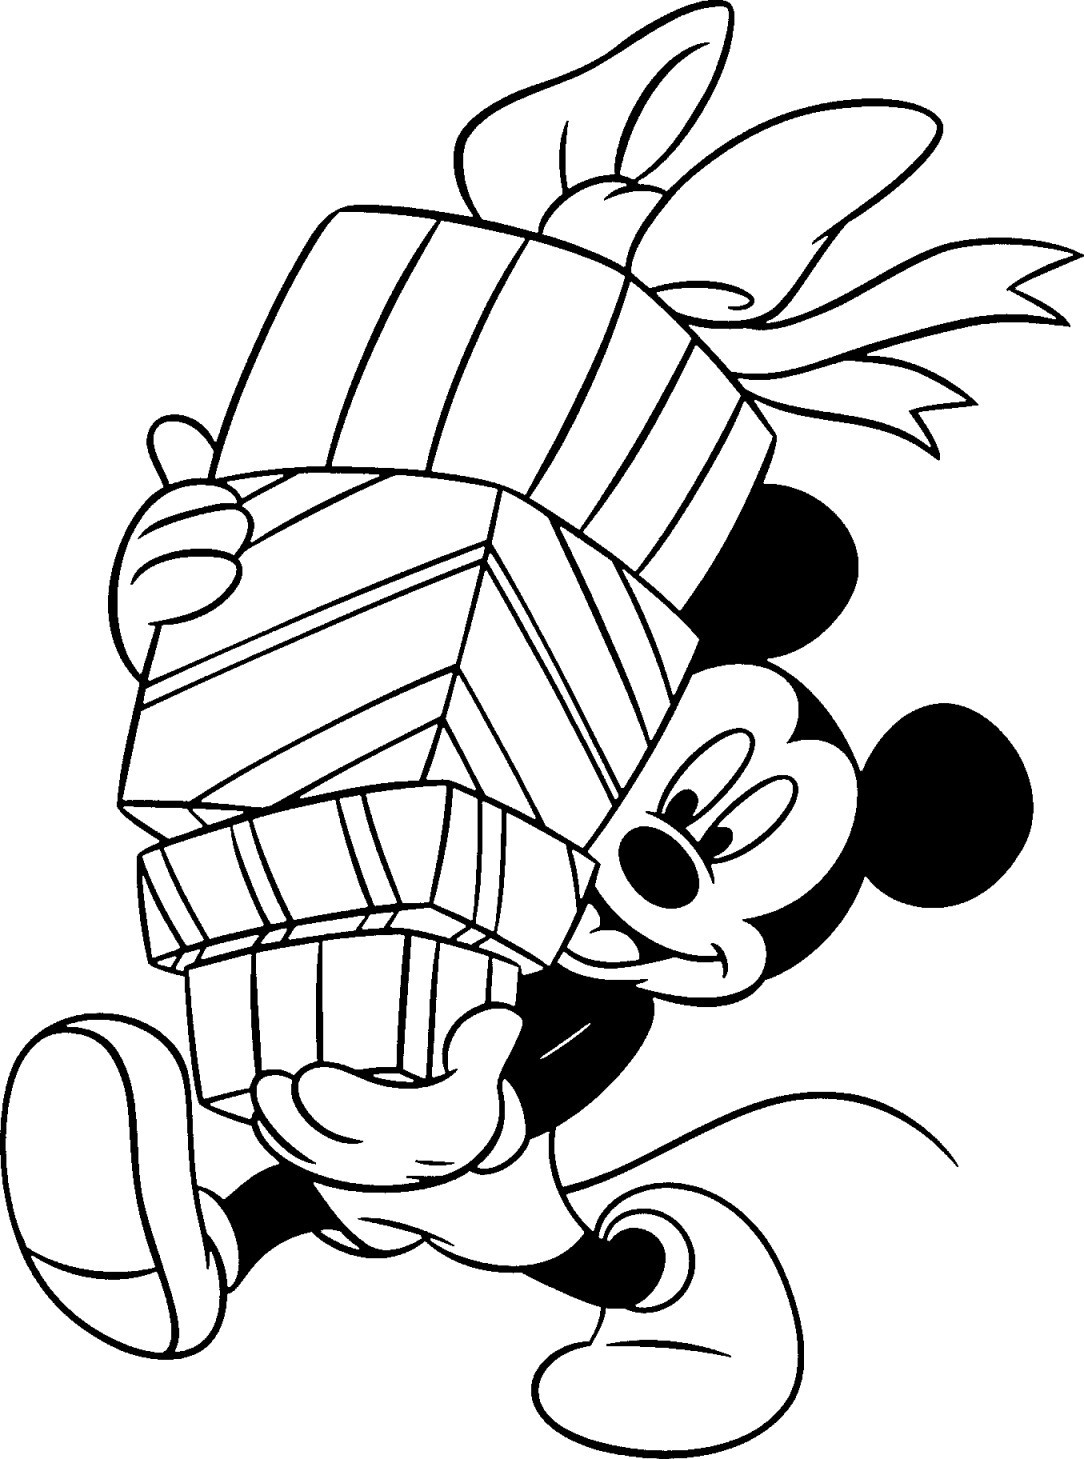 Christmas Coloring Pages For Children
 Free Disney Christmas Printable Coloring Pages for Kids